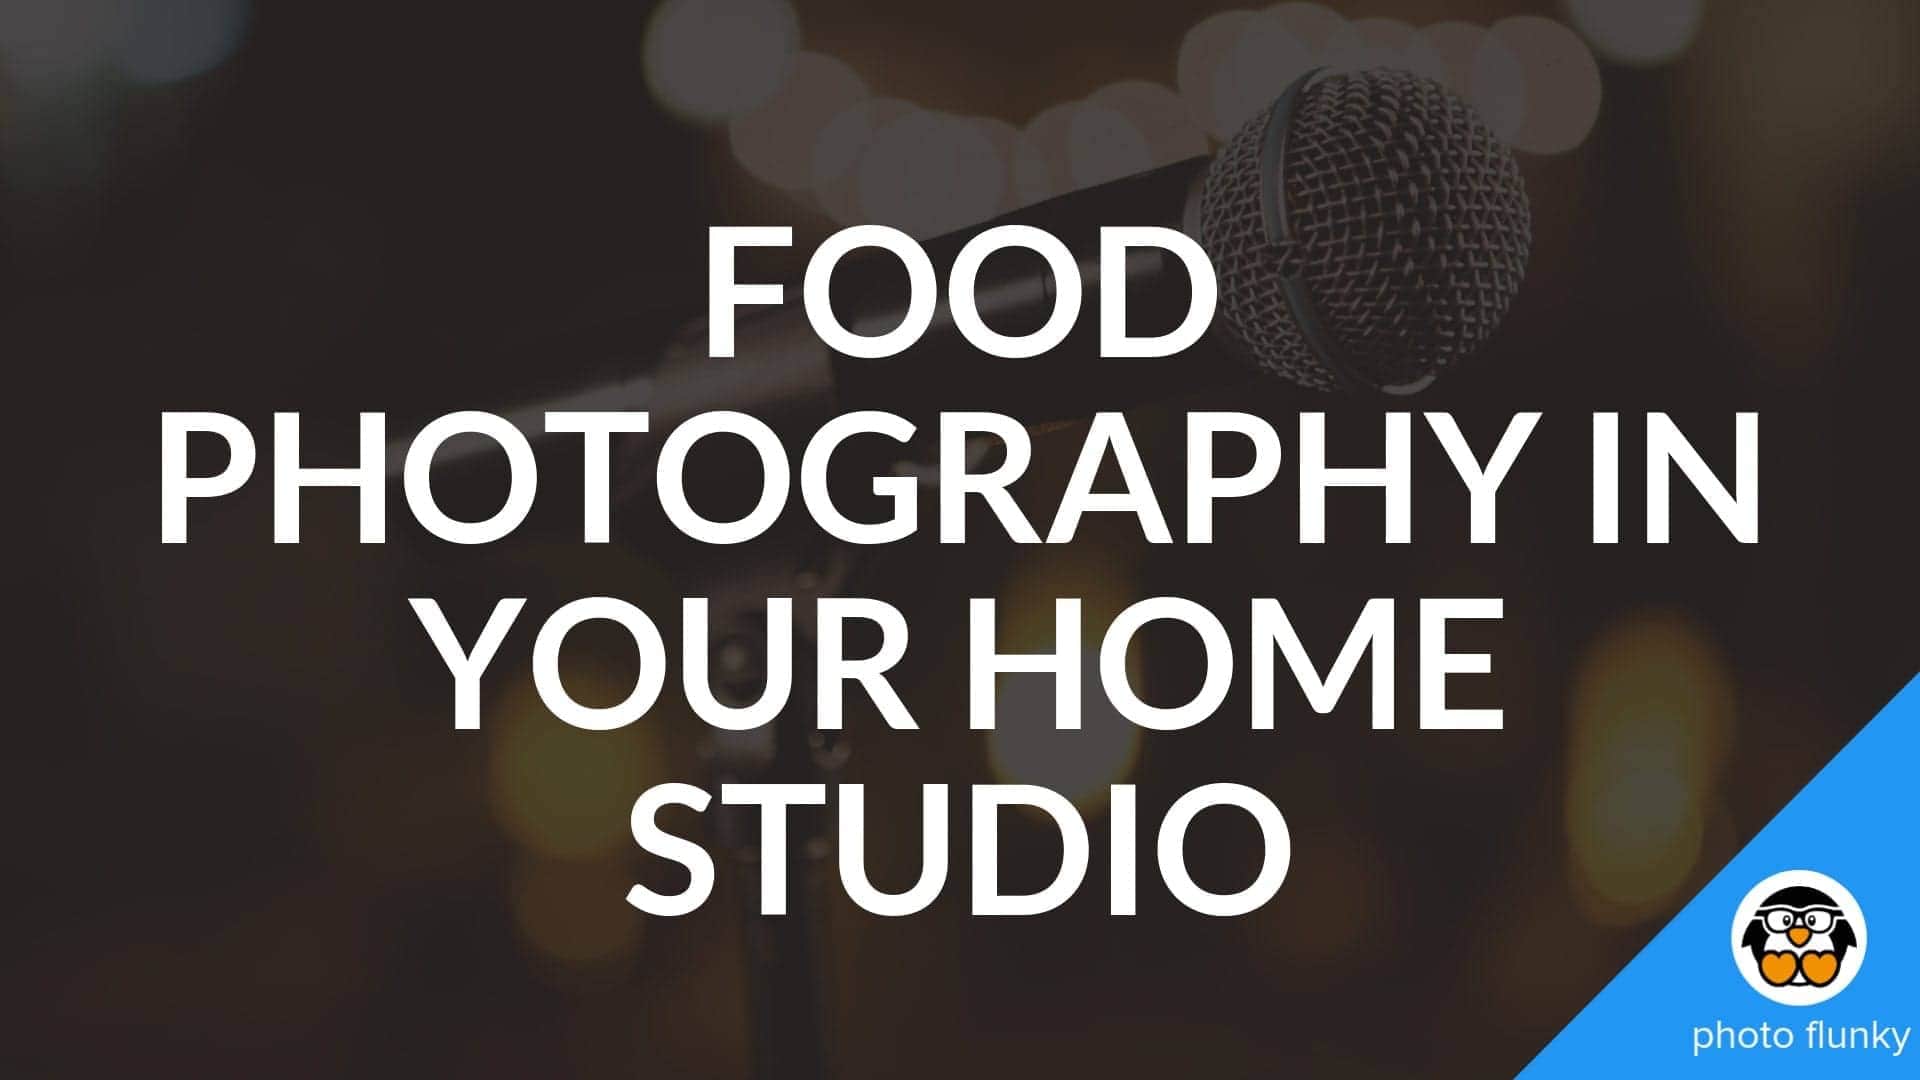 Food Photography In Your Home Studio